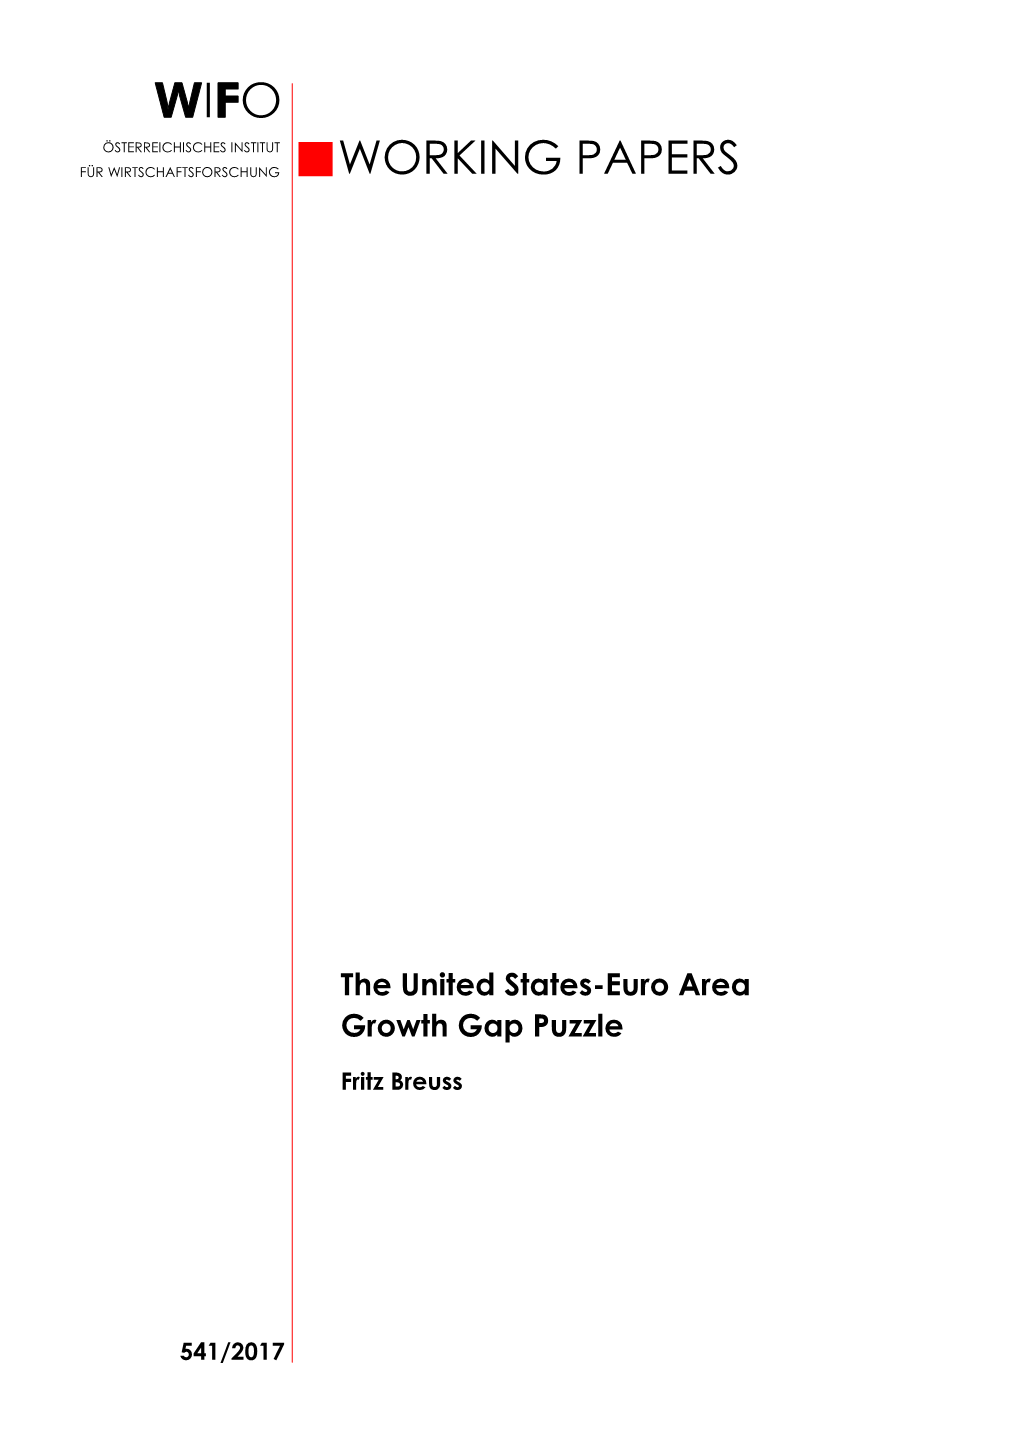 The United States-Euro Area Growth Gap Puzzle